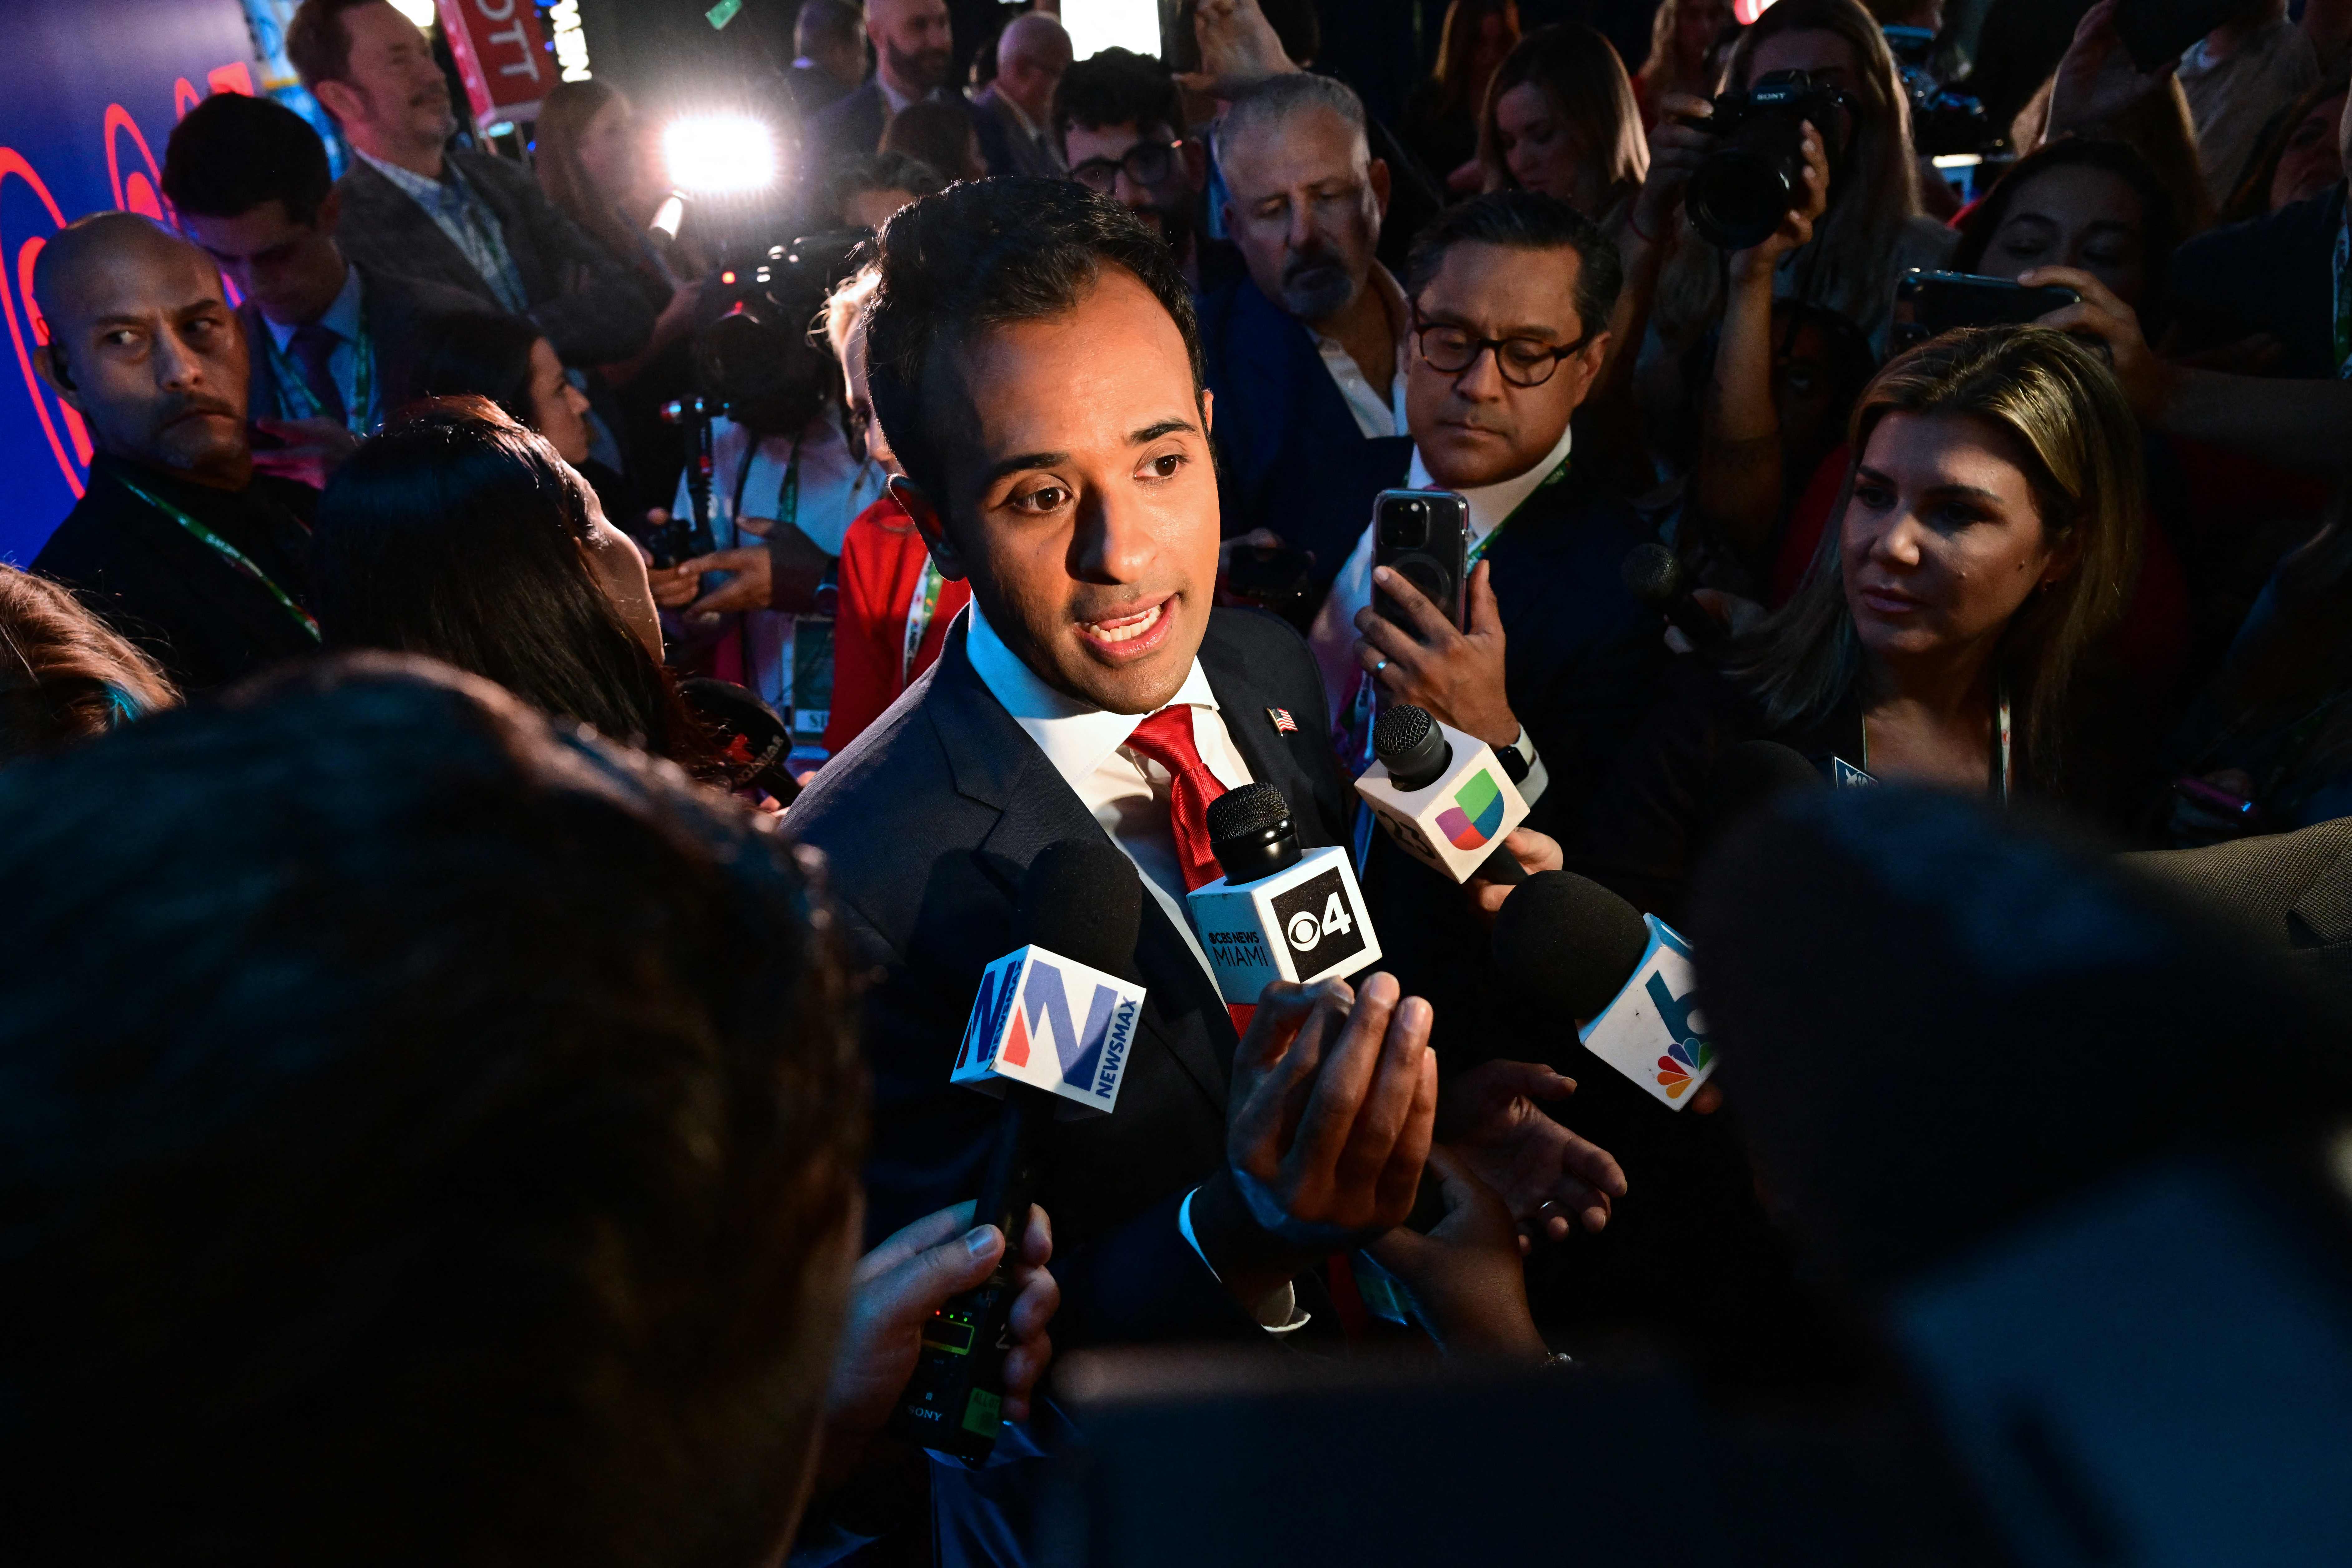 Entrepreneur Vivek Ramaswamy speaks to members of the media in the spin room following the third Republican presidential primary debate, at the Adrienne Arsht Center for the Performing Arts in Miami, Florida, on 8 November 2023